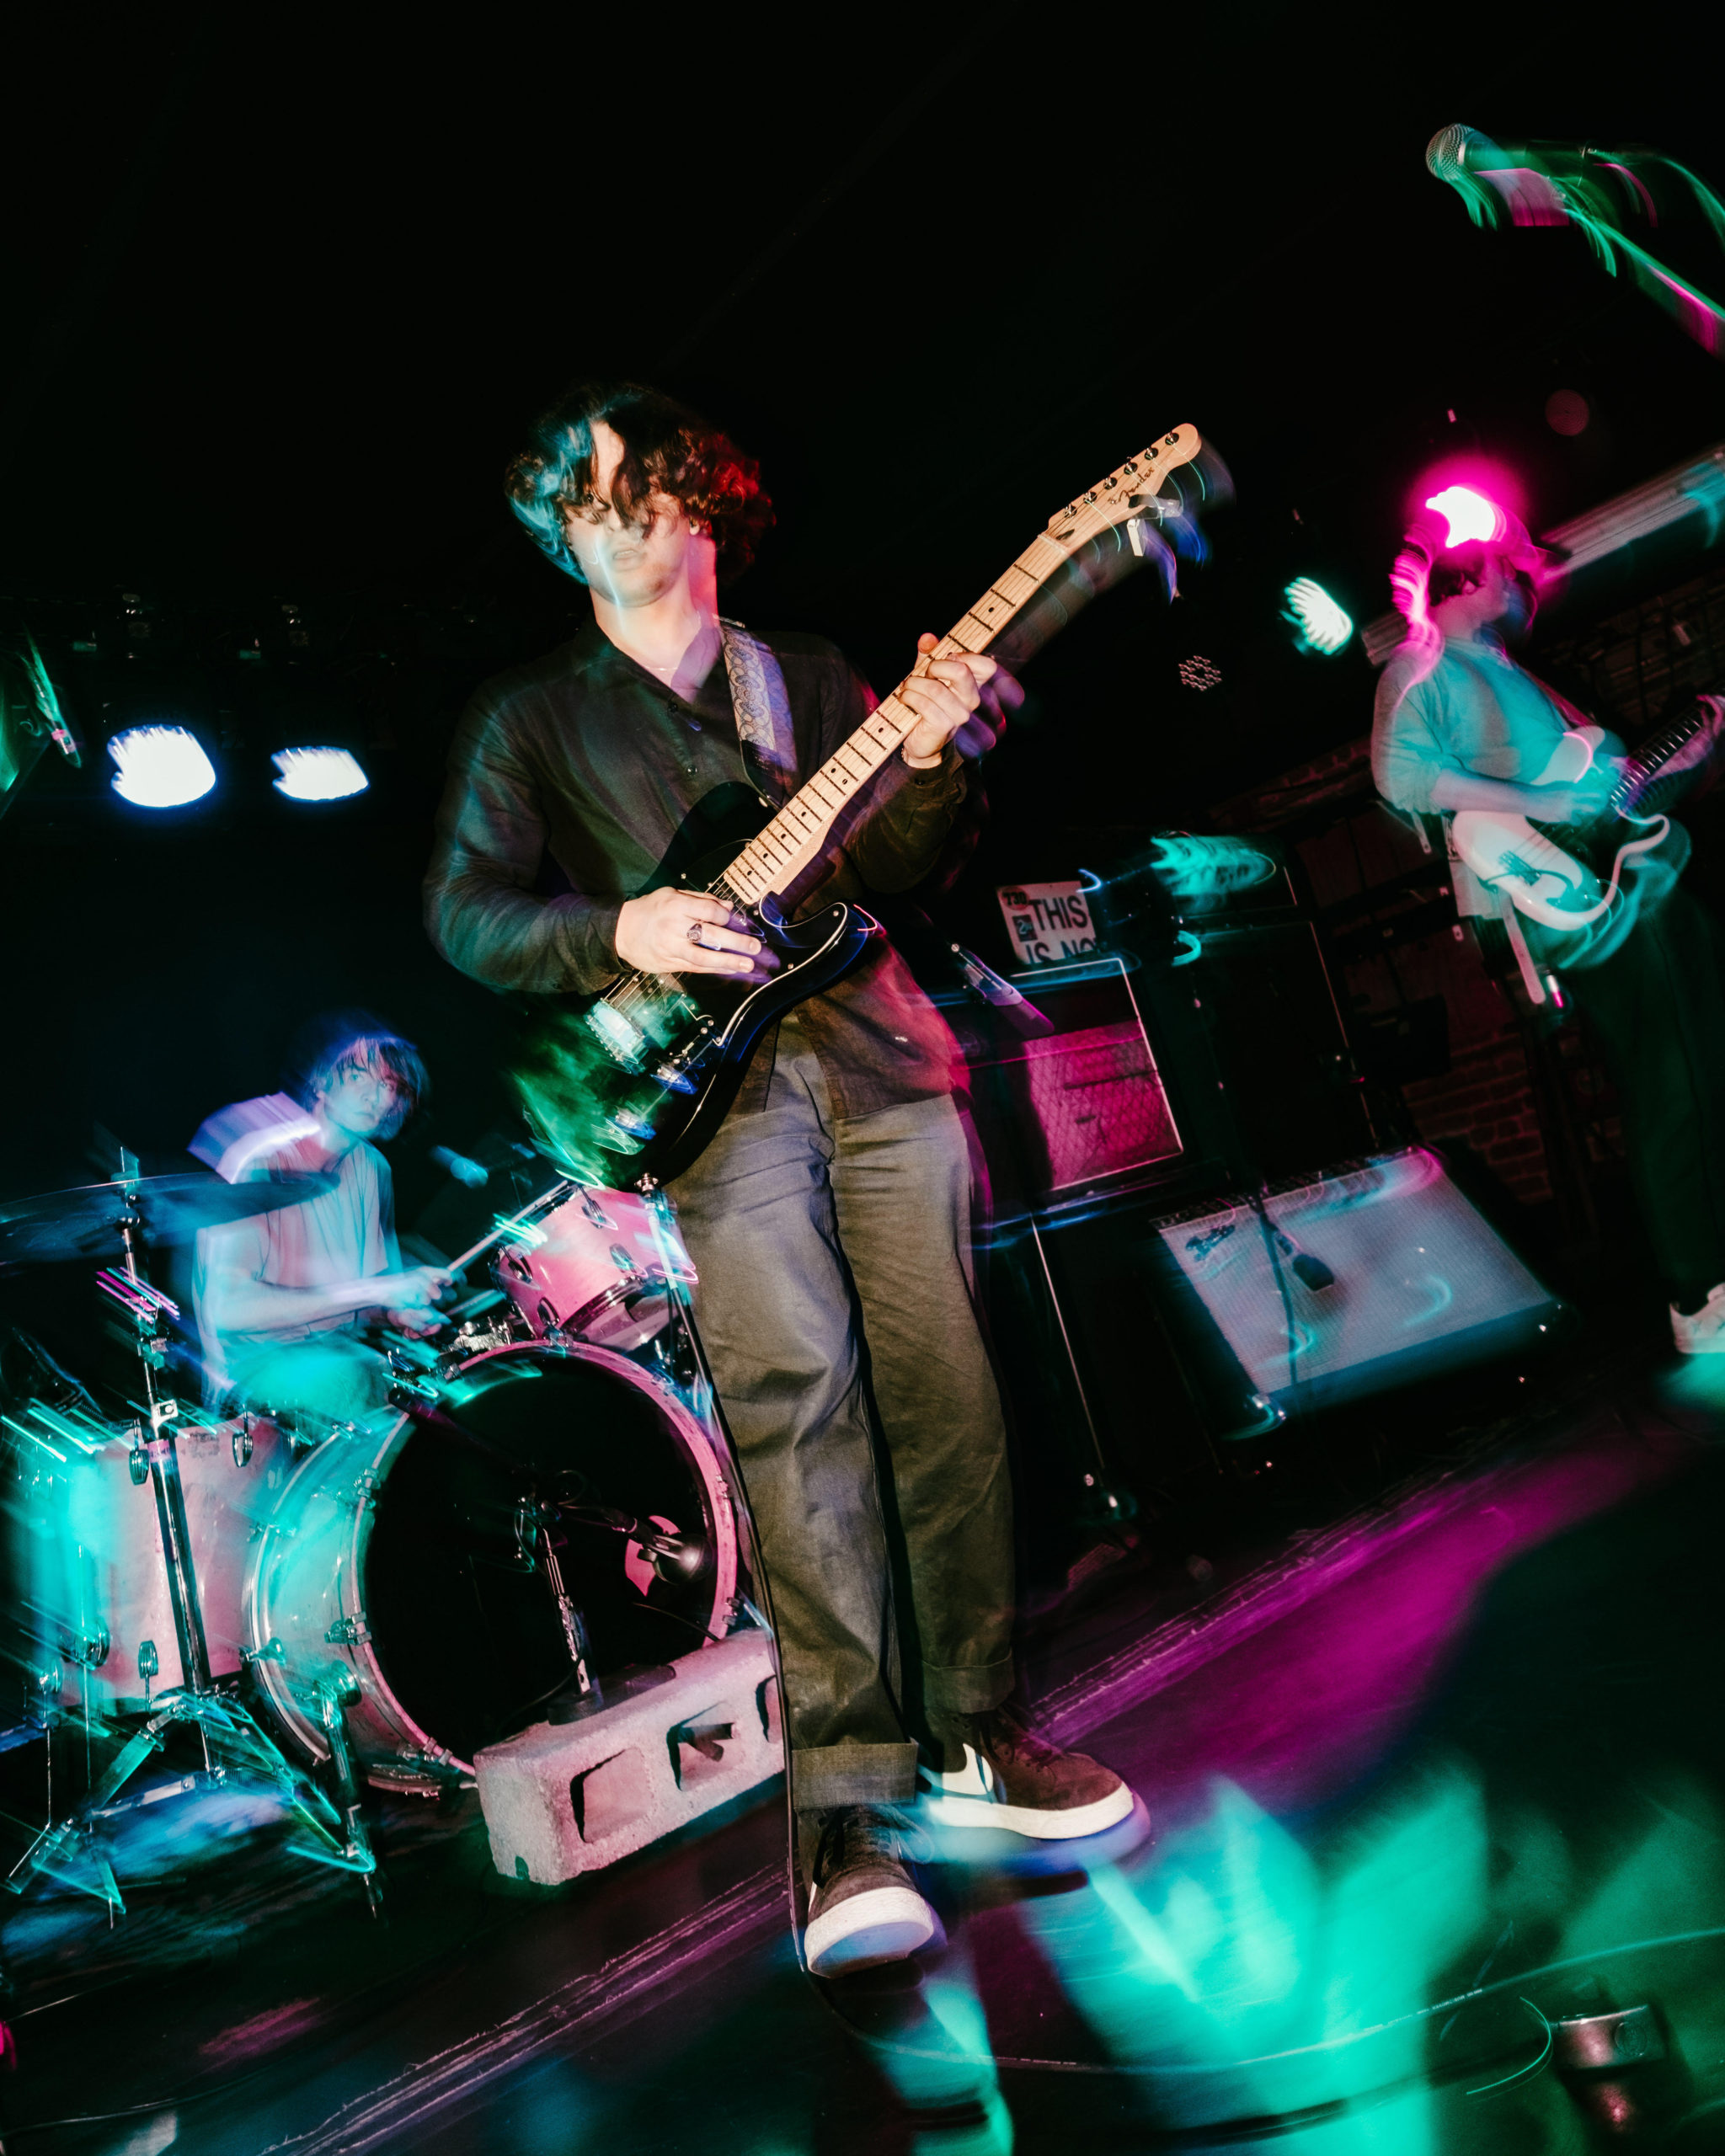 blurry photo of three band members performing on stage, center person in focus stands with an electric guitar